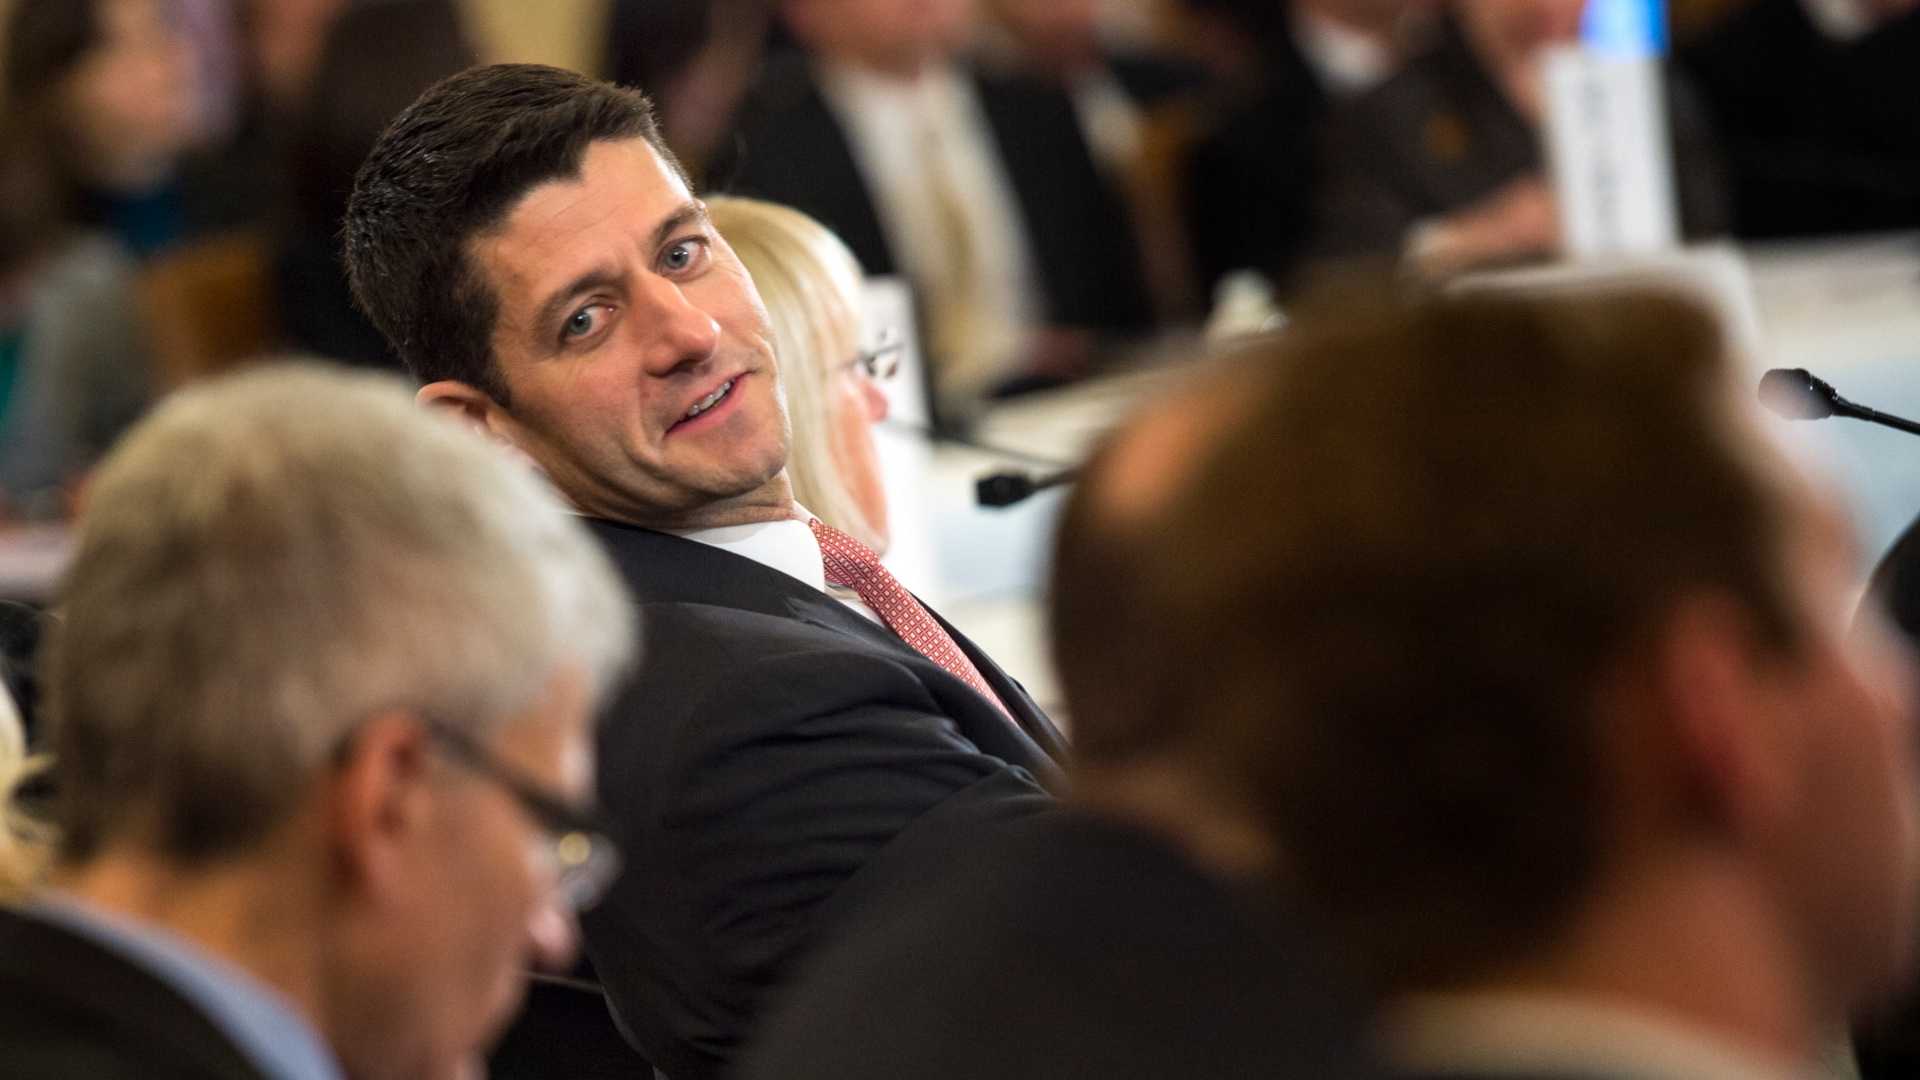 House approves Ryan plan to cut budget $5 trillion - The Washington Post